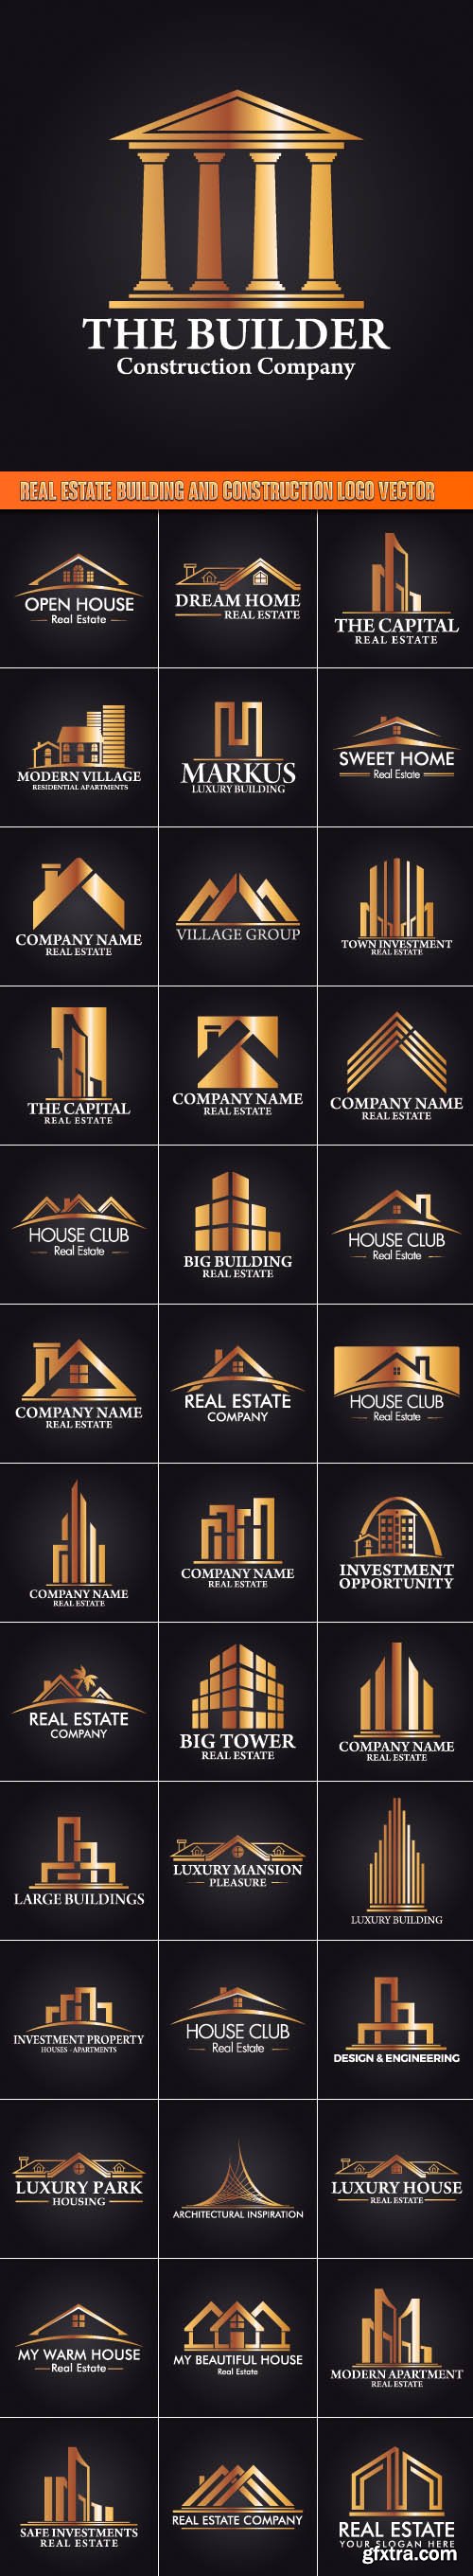 Real Estate Building and Construction Logo Vector